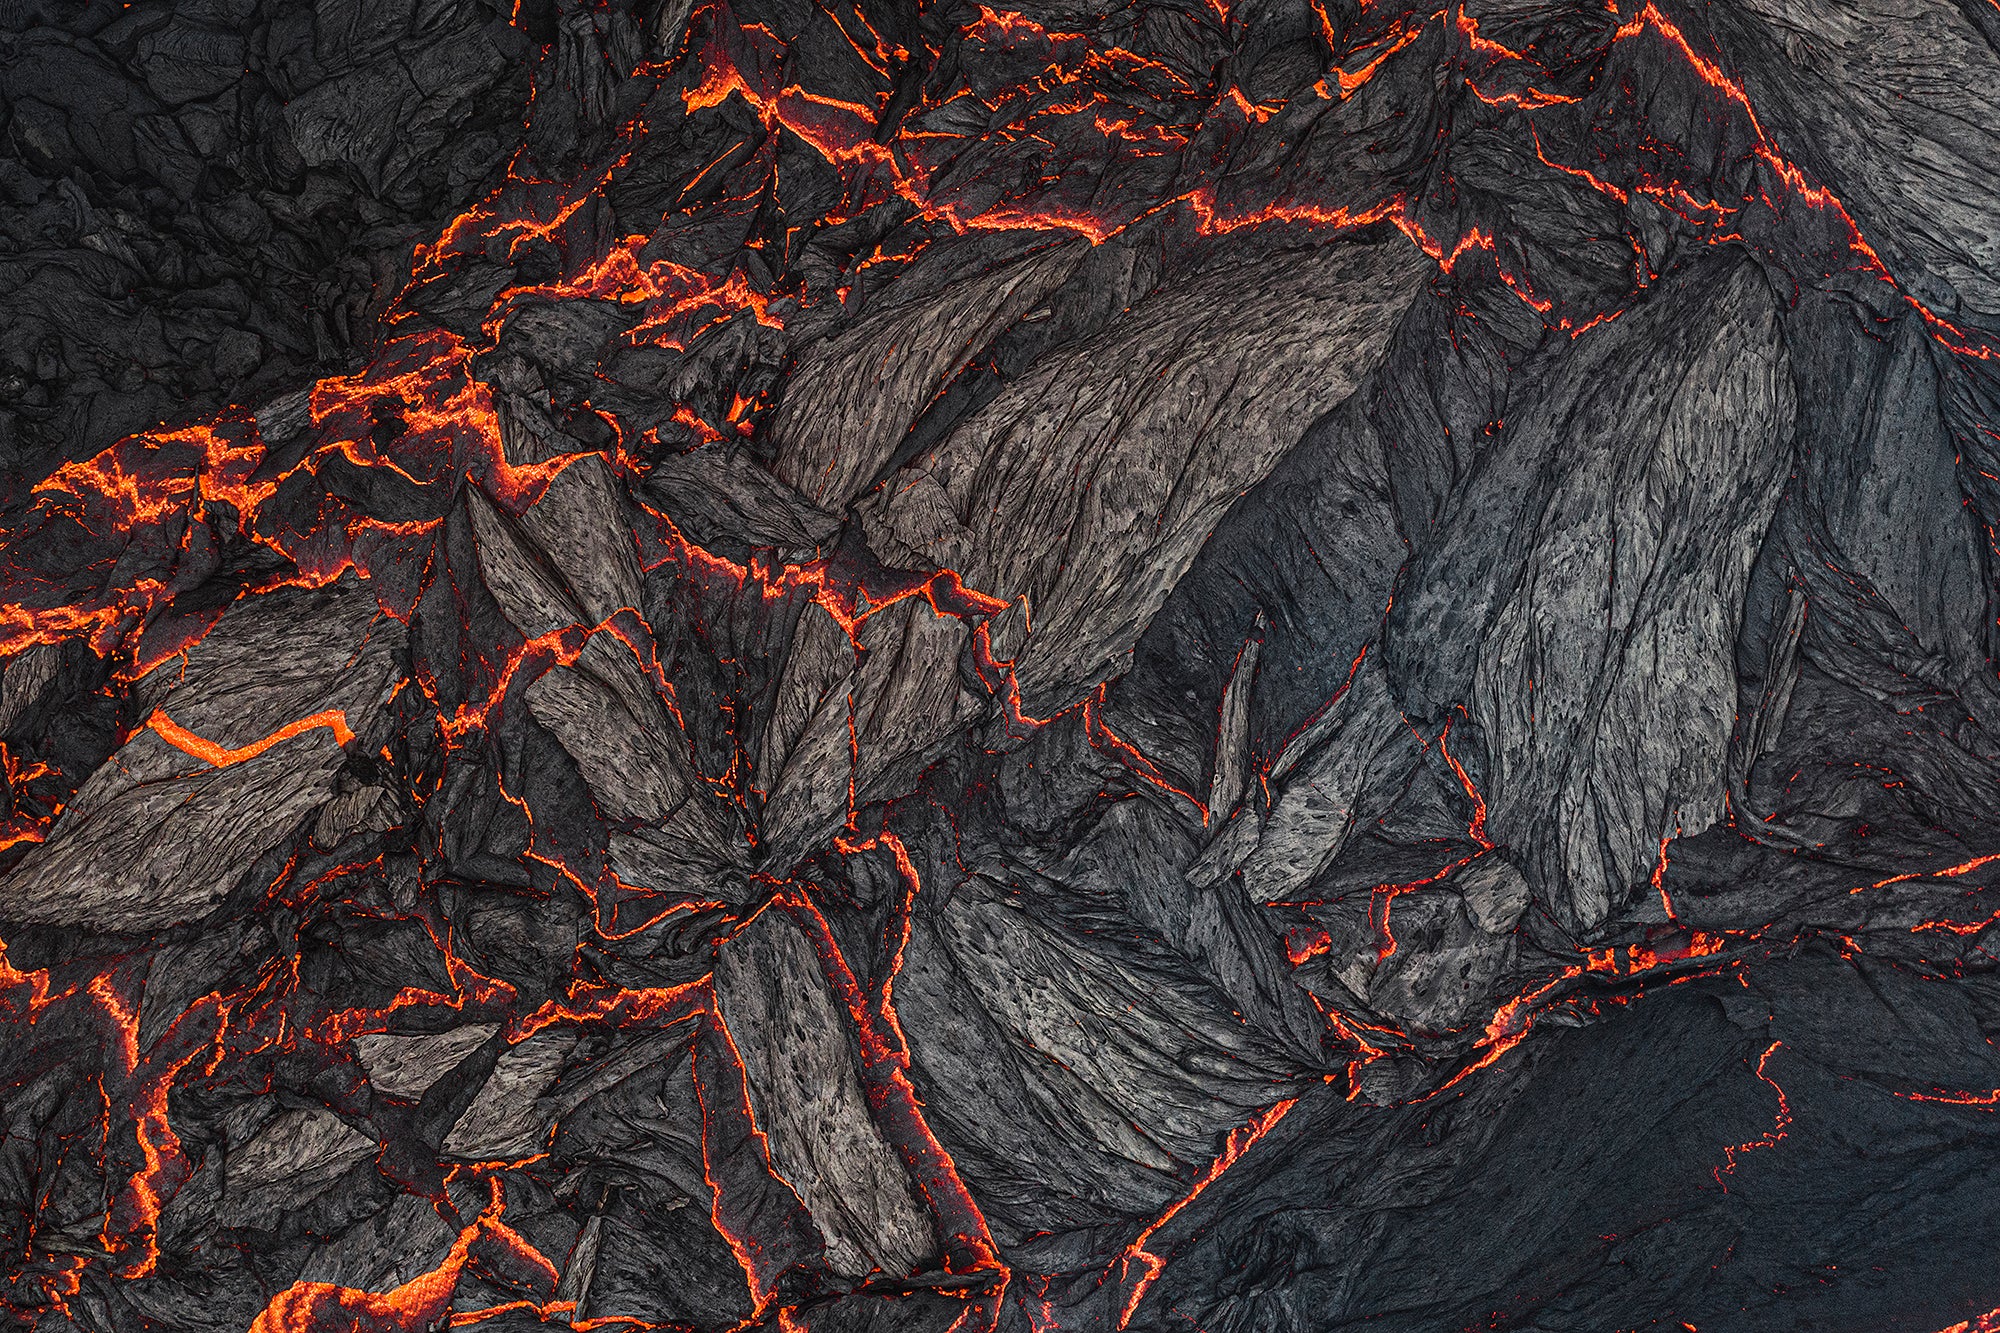 Veins of the Volcano l image